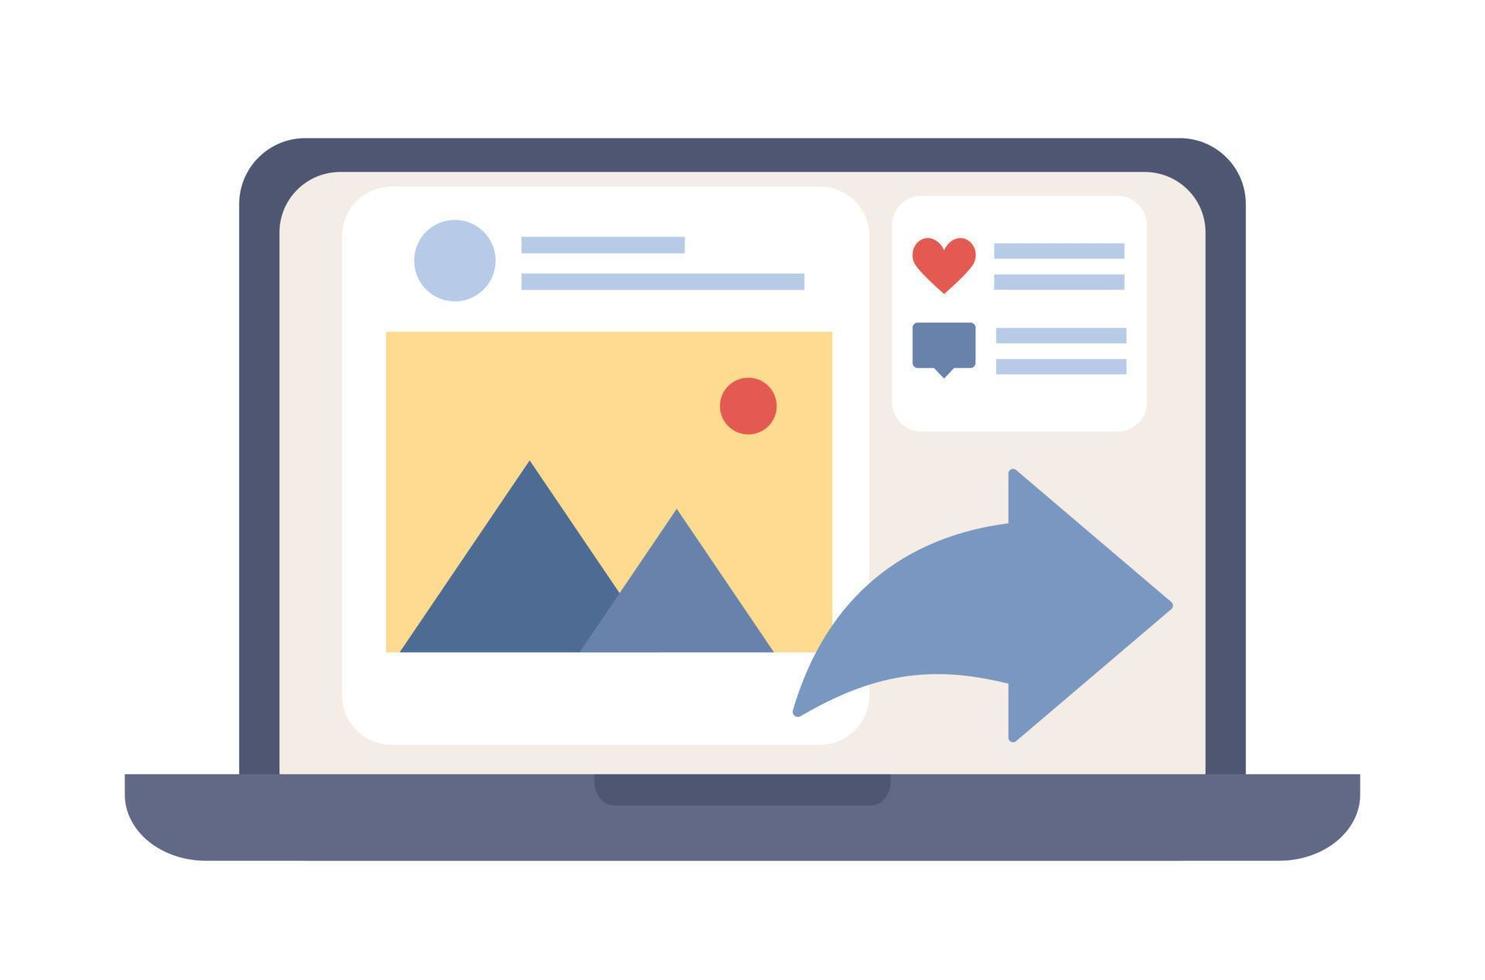 Share icon. People sharing data, photos, links, posts and news in social networks on laptop screen. Social networking concept. Vector flat illustration